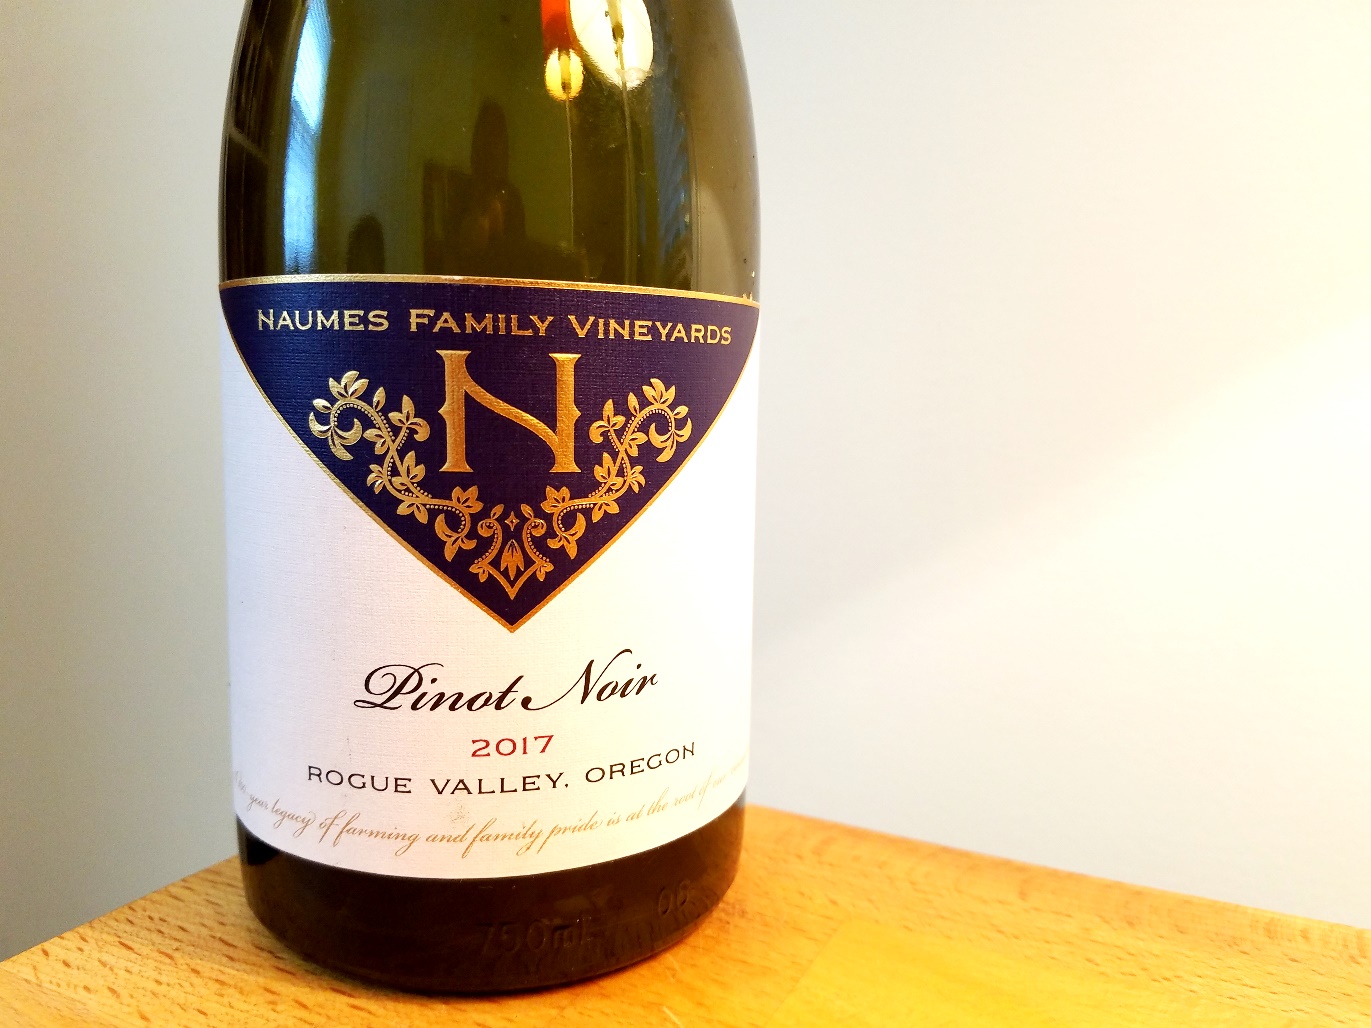 Naumes Family Vineyards, Pinot Noir 2017, Rogue Valley, Oregon, Wine Casual